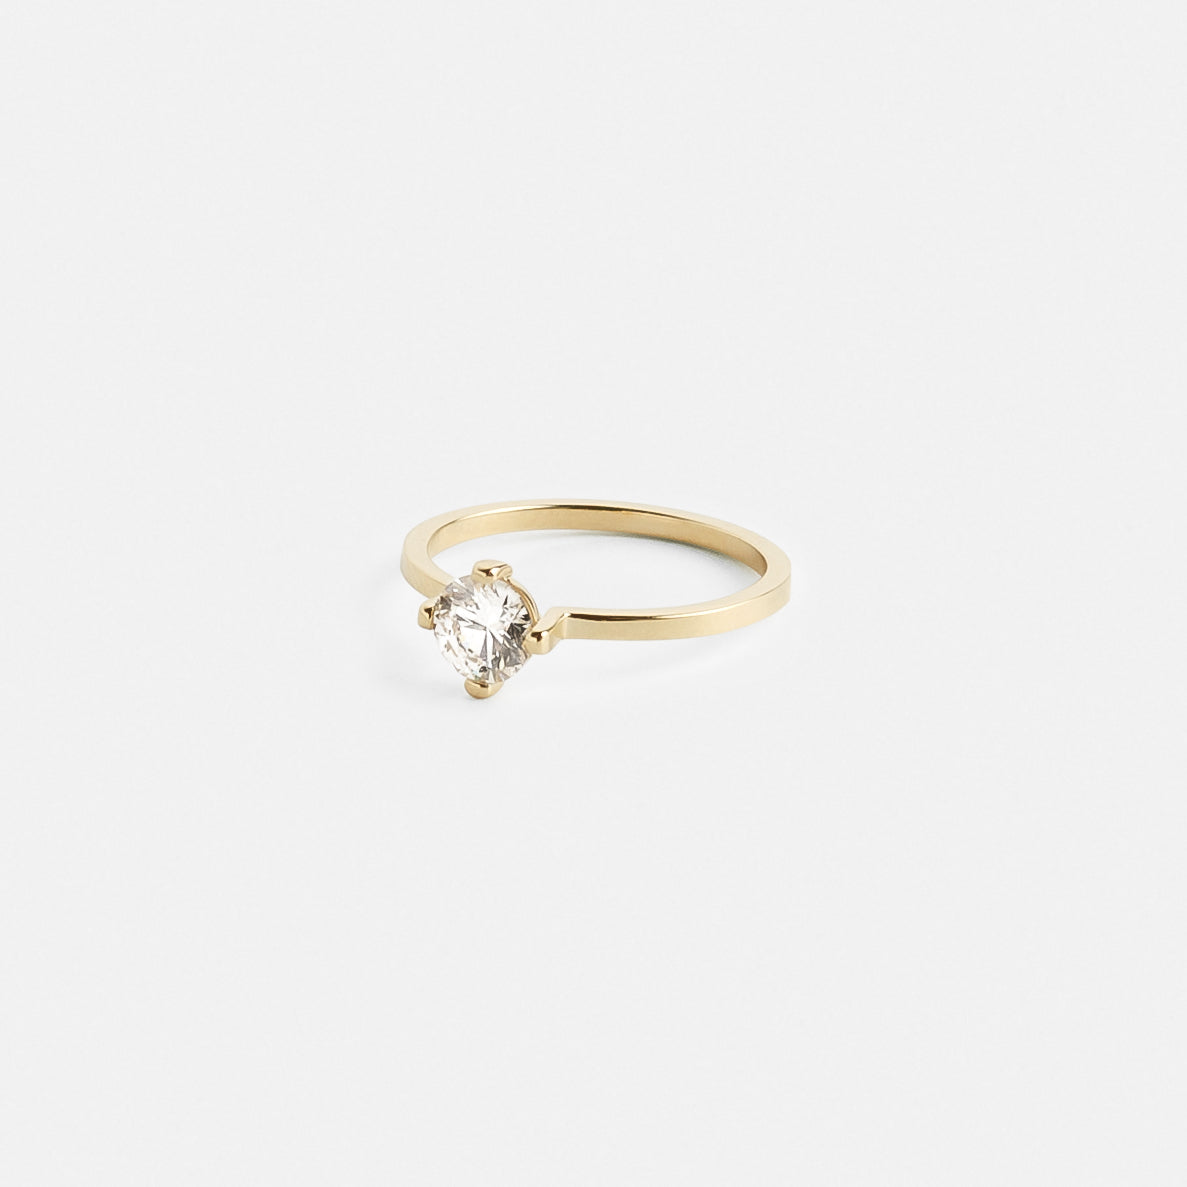 Ema Minimalist Engagement Ring in 14k Gold set with a round brilliant cut 1ct natural diamond By SHW Fine Jewelry NYC